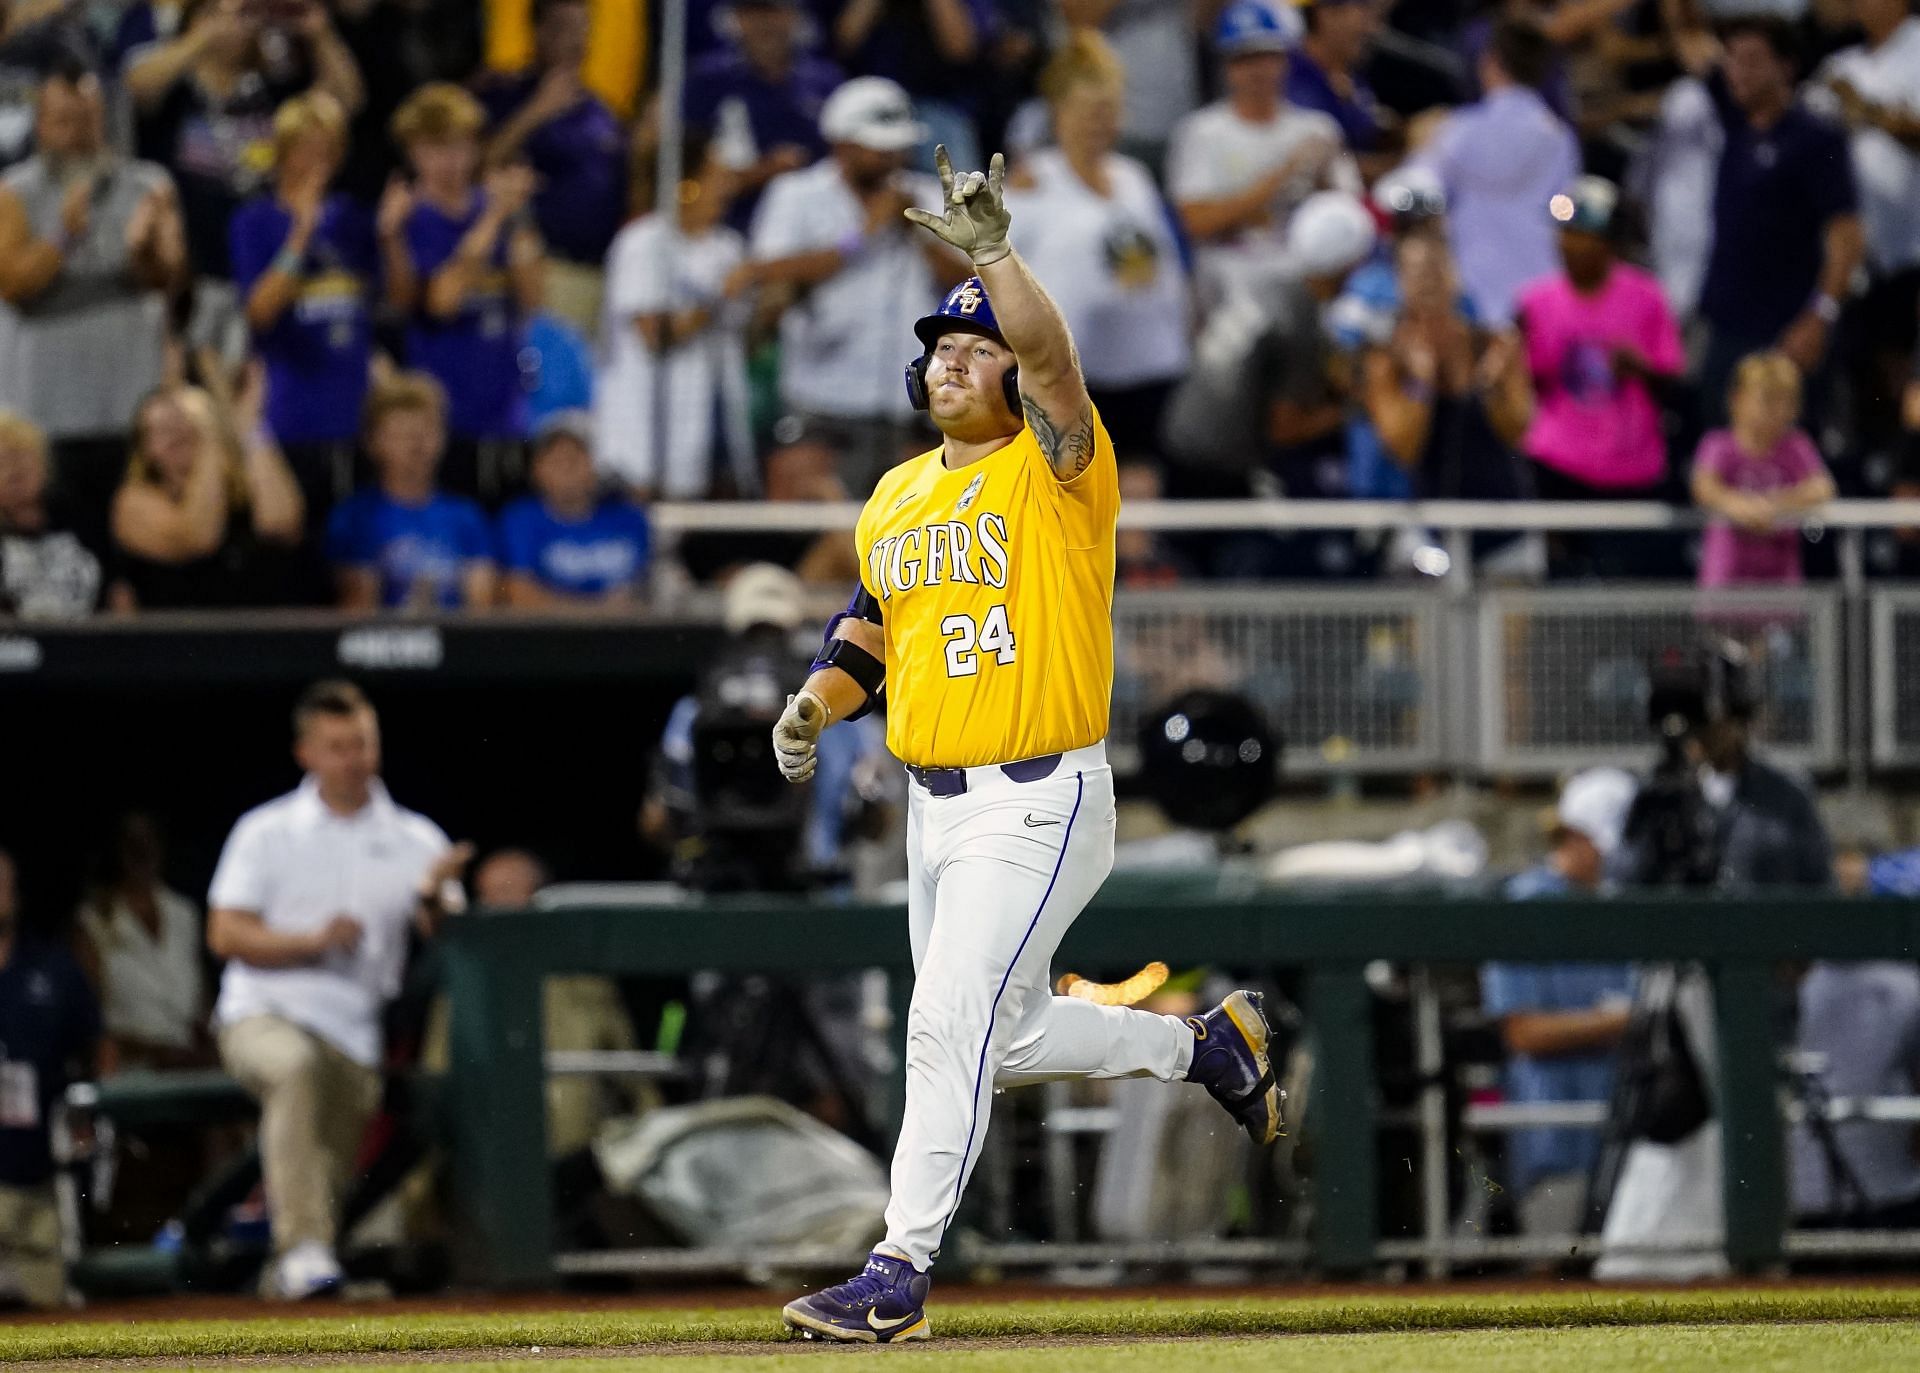 LSU vs. Oral Roberts baseball: How to watch the series on live stream